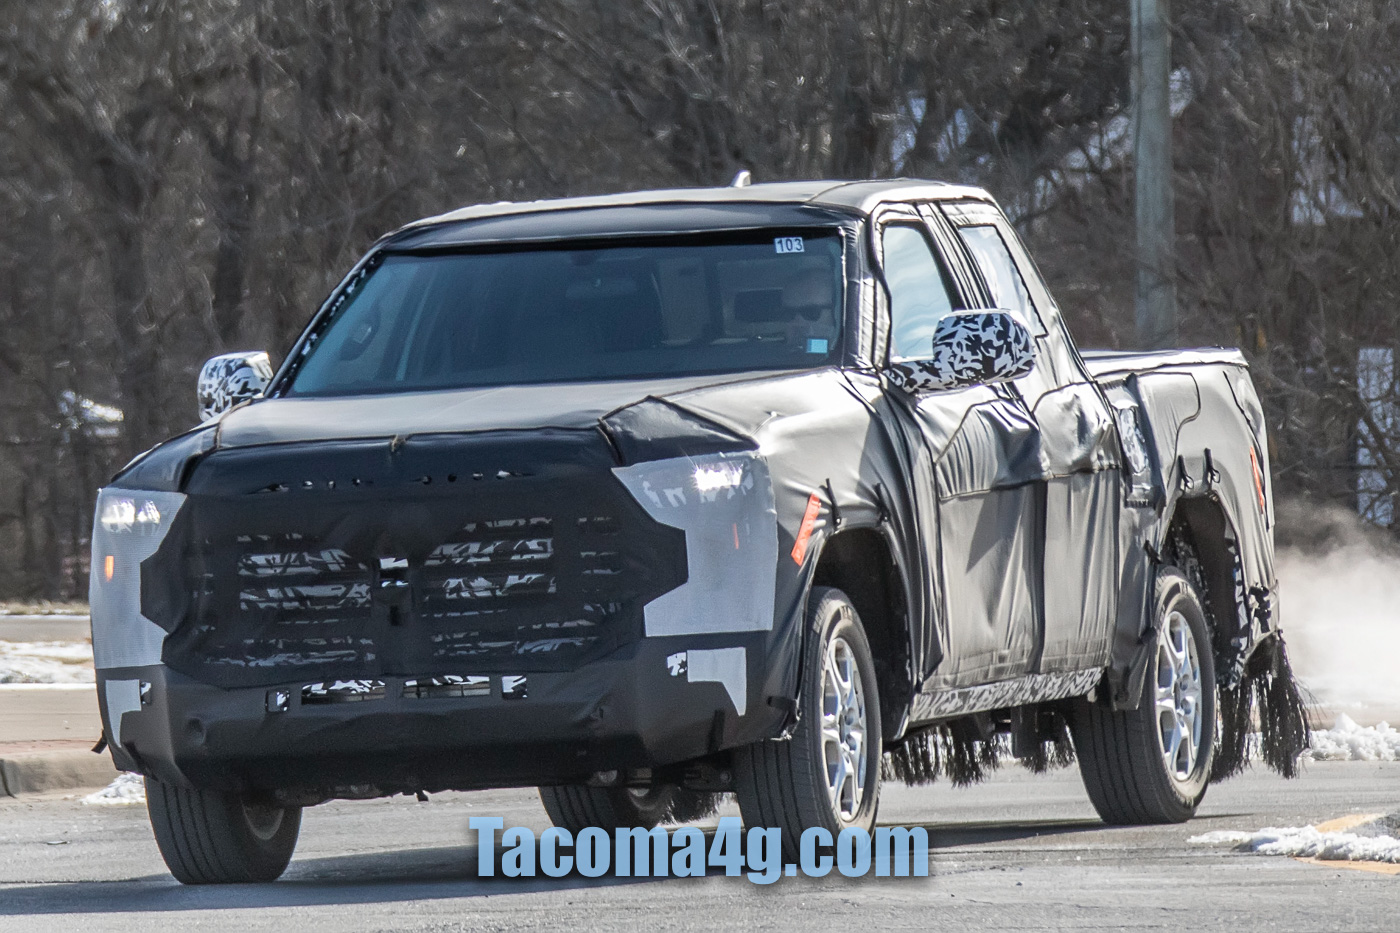 next-toyota-tacoma-mule-spied-3-jpg.3239